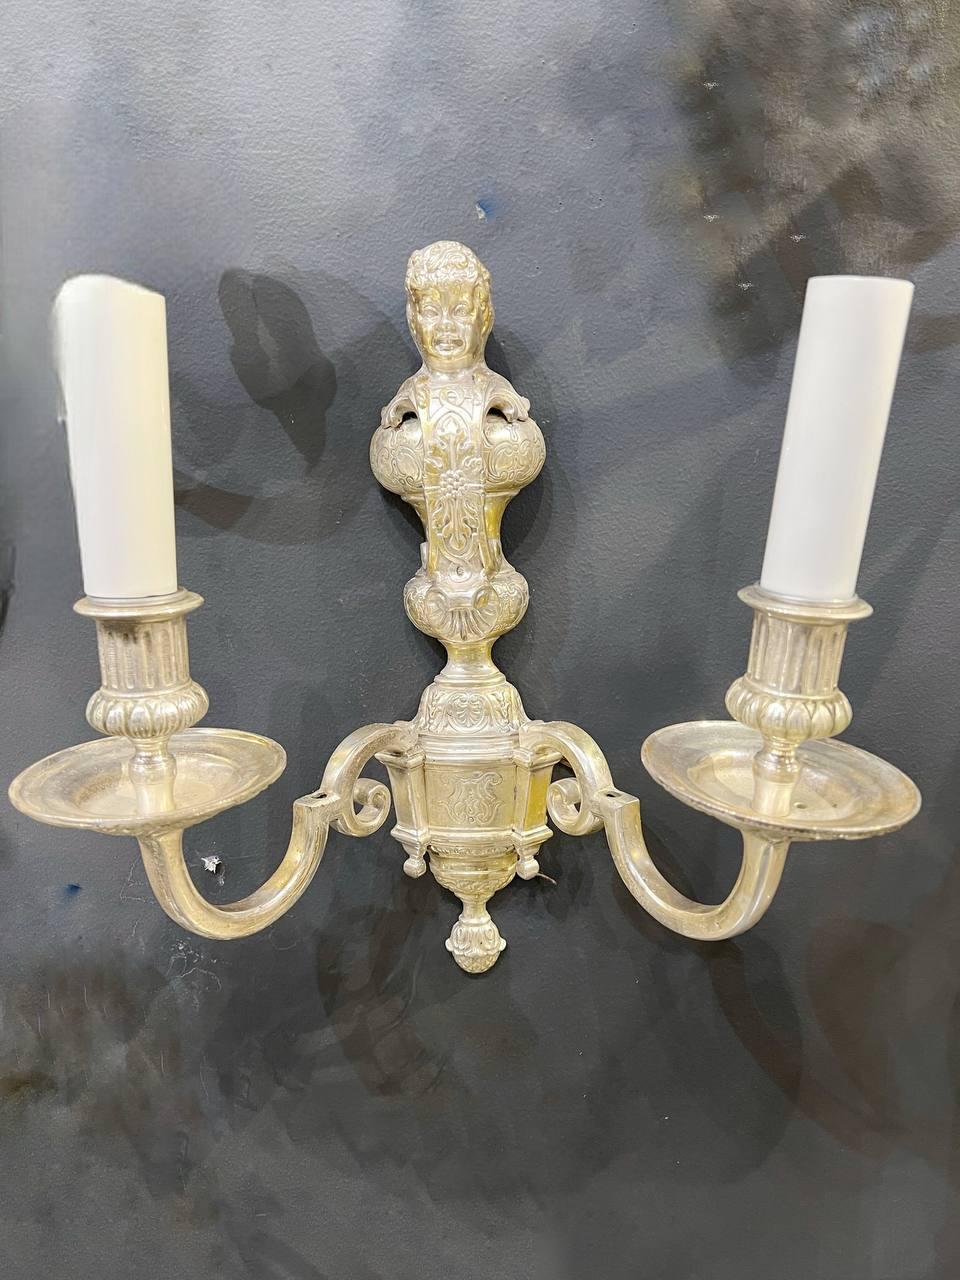 Engraved 1900's Caldwell Silver Plated Cherub Sconces For Sale